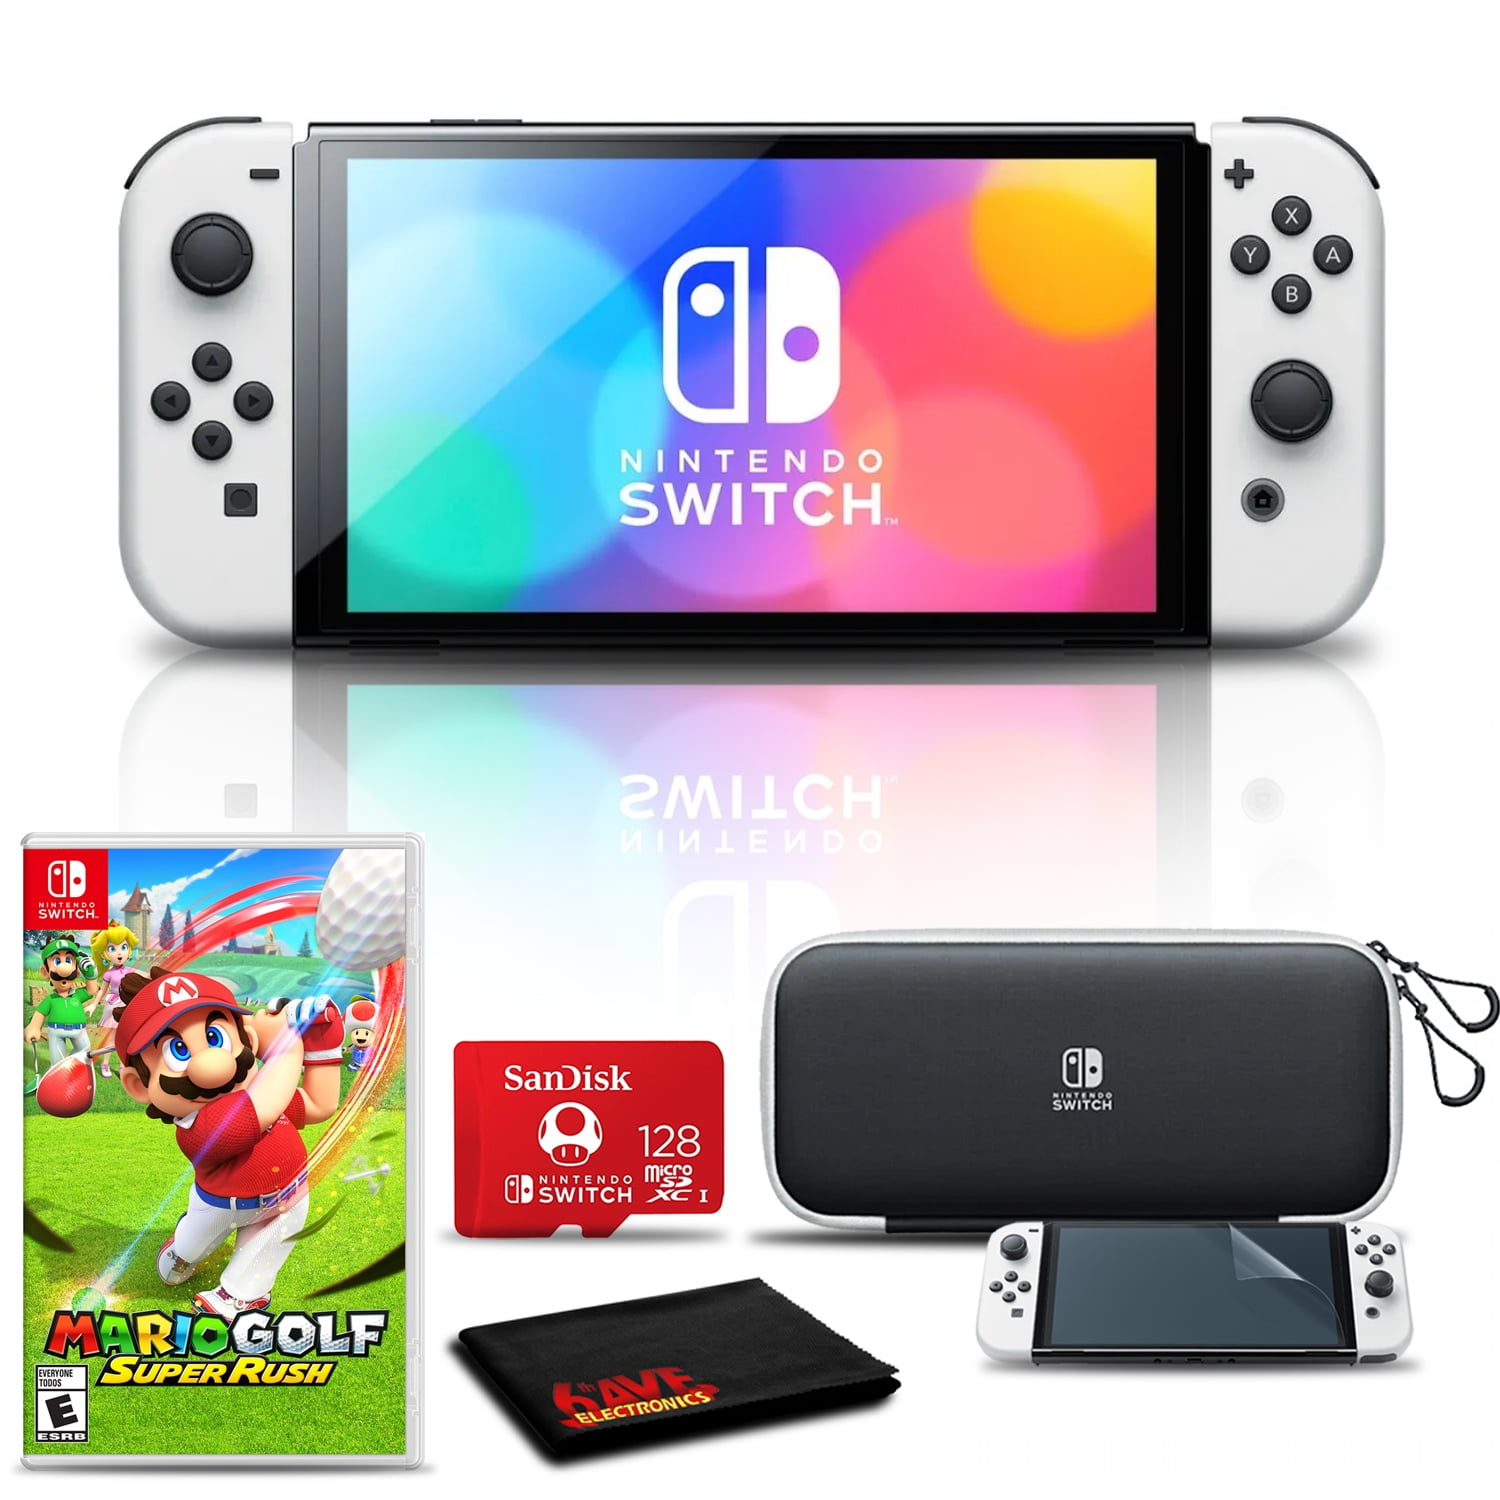 Please watch Extremists Fitness Nintendo Switch OLED White with Mario Golf, 128GB Card, and More -  Walmart.com